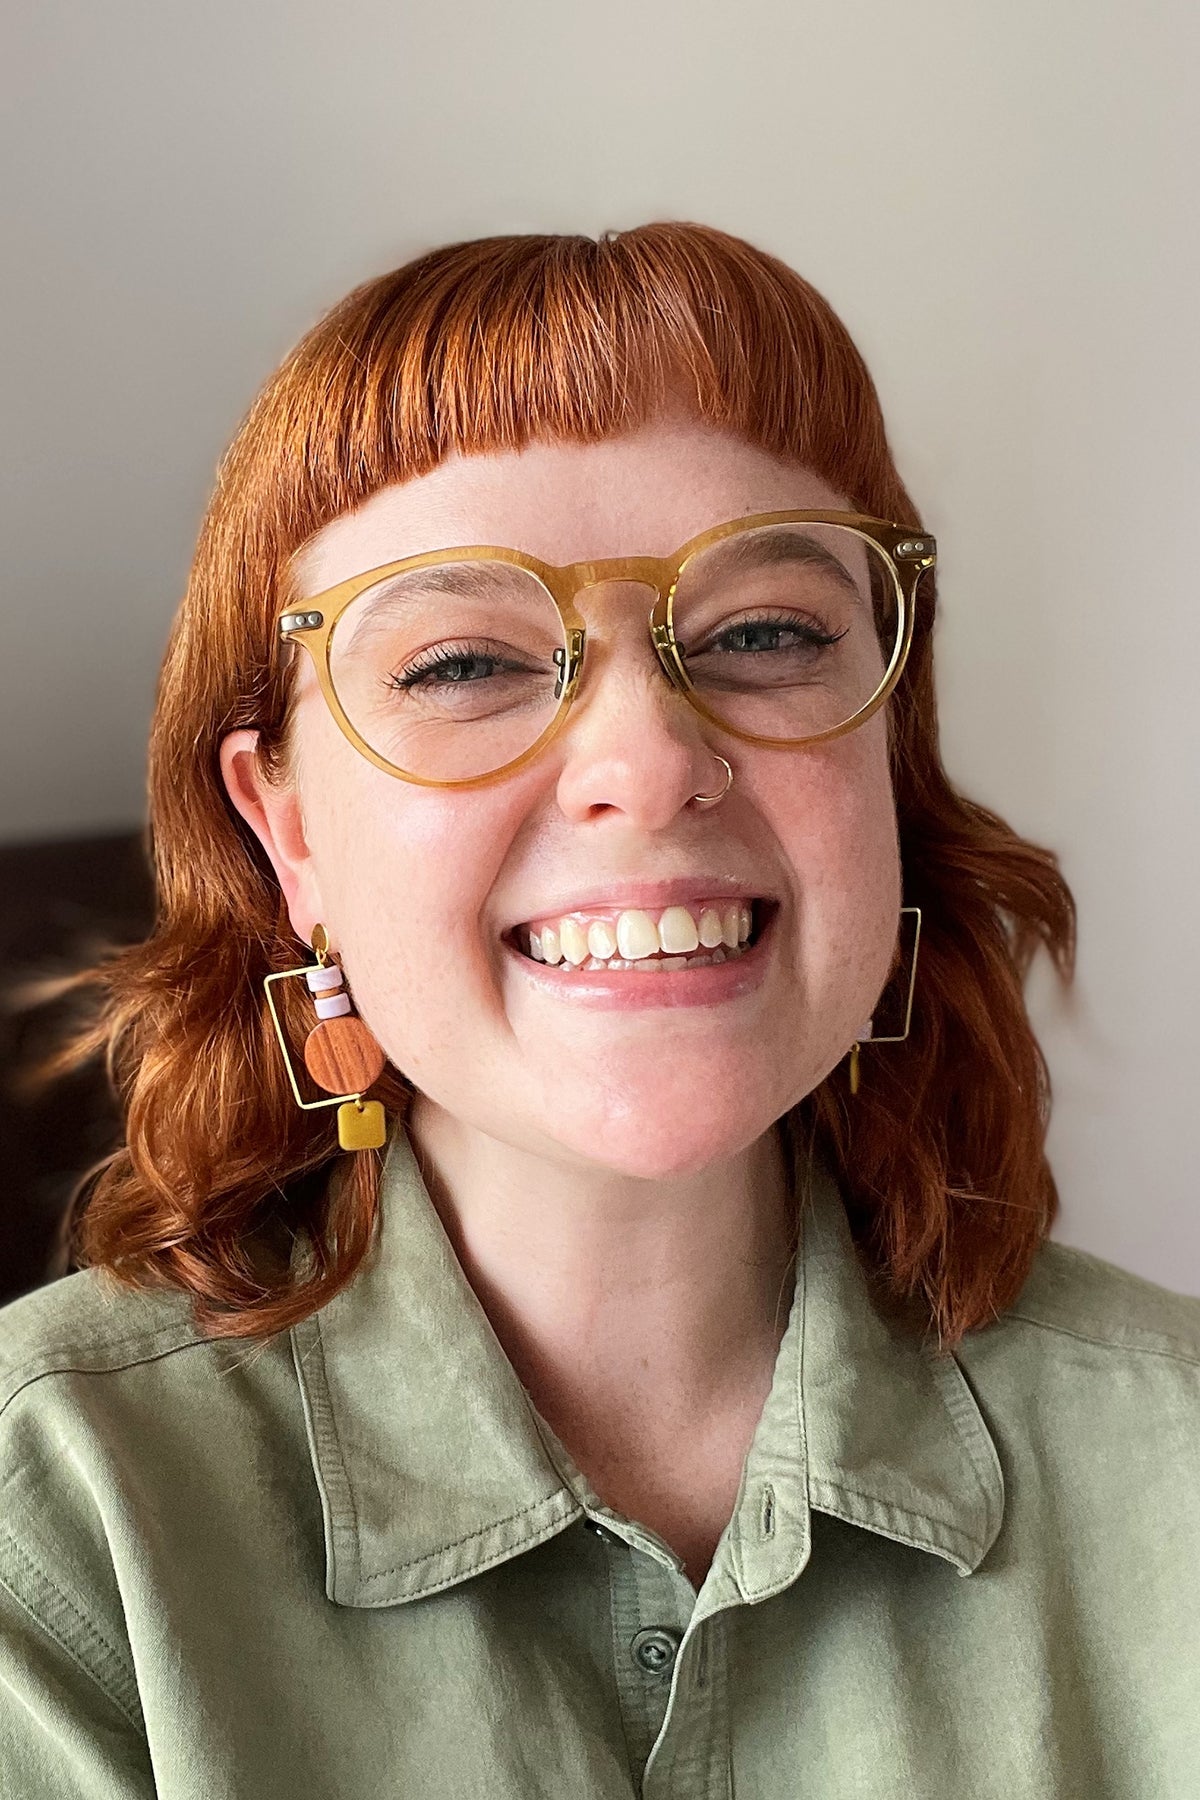 A smiling lady with red hair and yellow glasses stands against a white background. She wears a green linen shirt and a pair of the exhibit earrings in soft mauve and chartreuse.